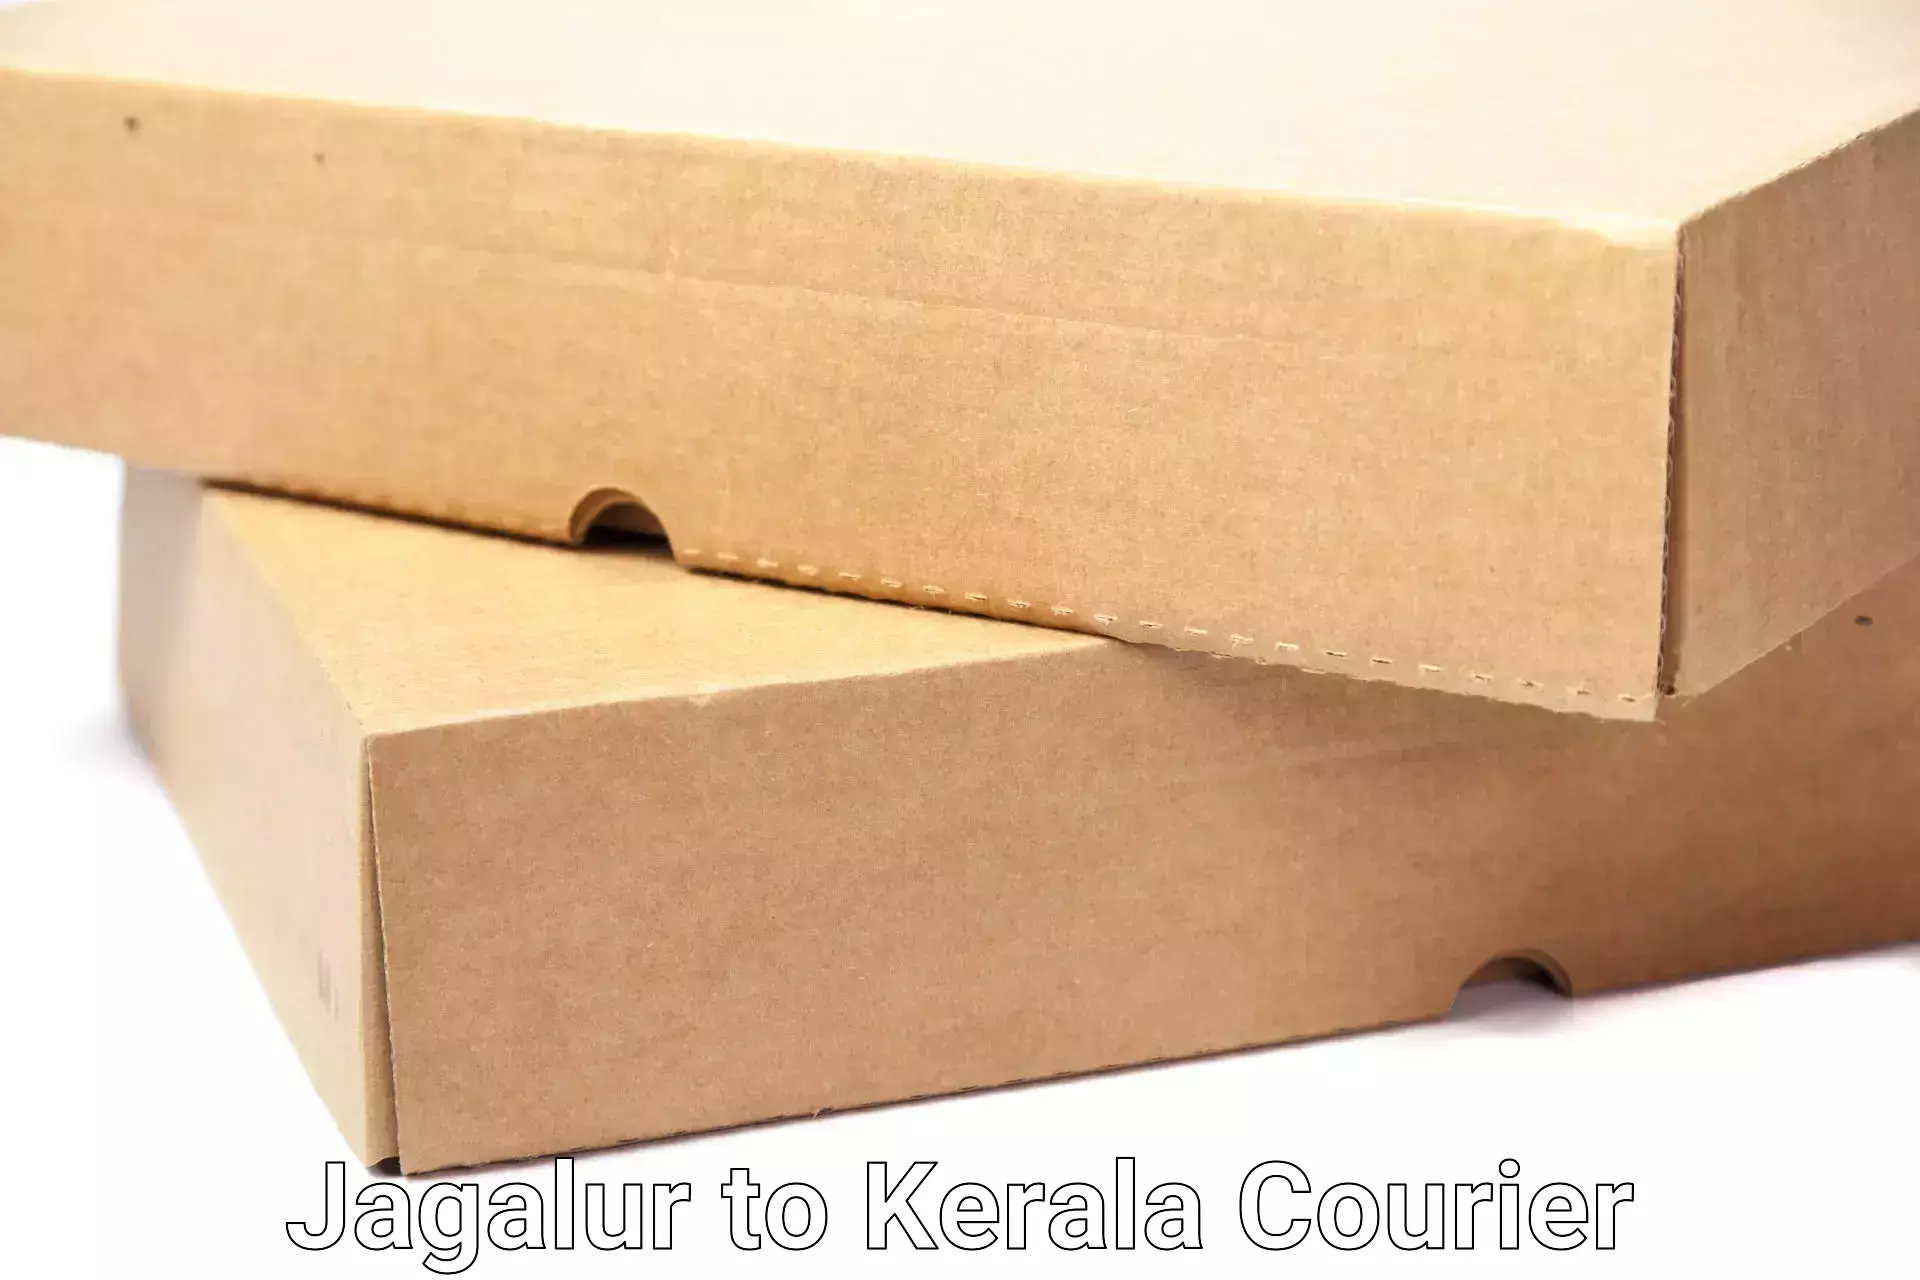 Safe furniture transport Jagalur to Cochin University of Science and Technology